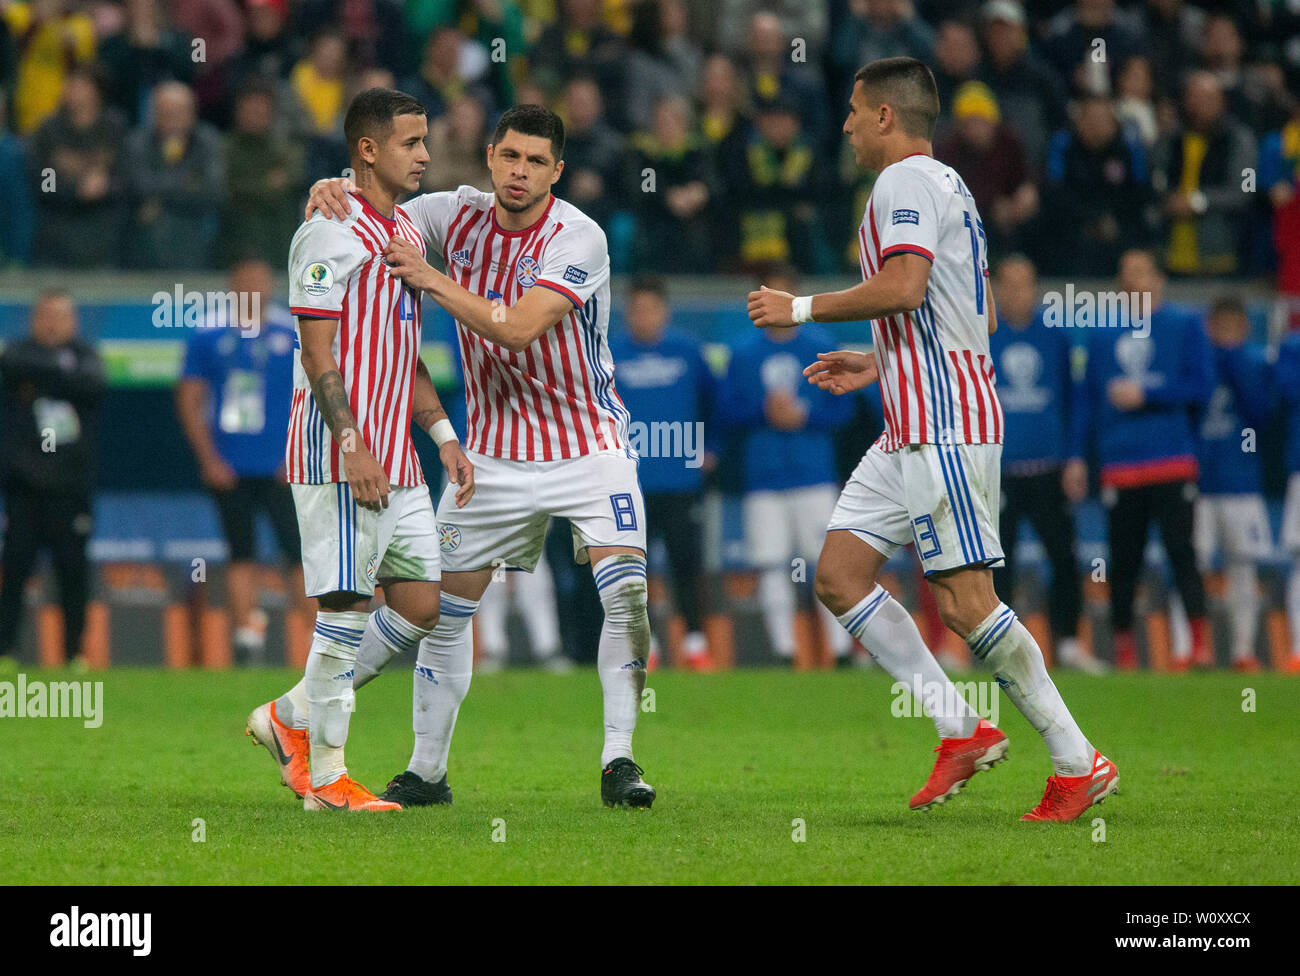 Porto Alegre, Brazil. 28th June, 2019. Derlis González misses a penalty during the match between Brazil and Paraguay, valid for the quarterfinals of the Copa América 2019, held this Thursday (27th) at the Grêmio Arena in Porto Alegre, RS. Credit: Raul Pereira/FotoArena/Alamy Live News Stock Photo